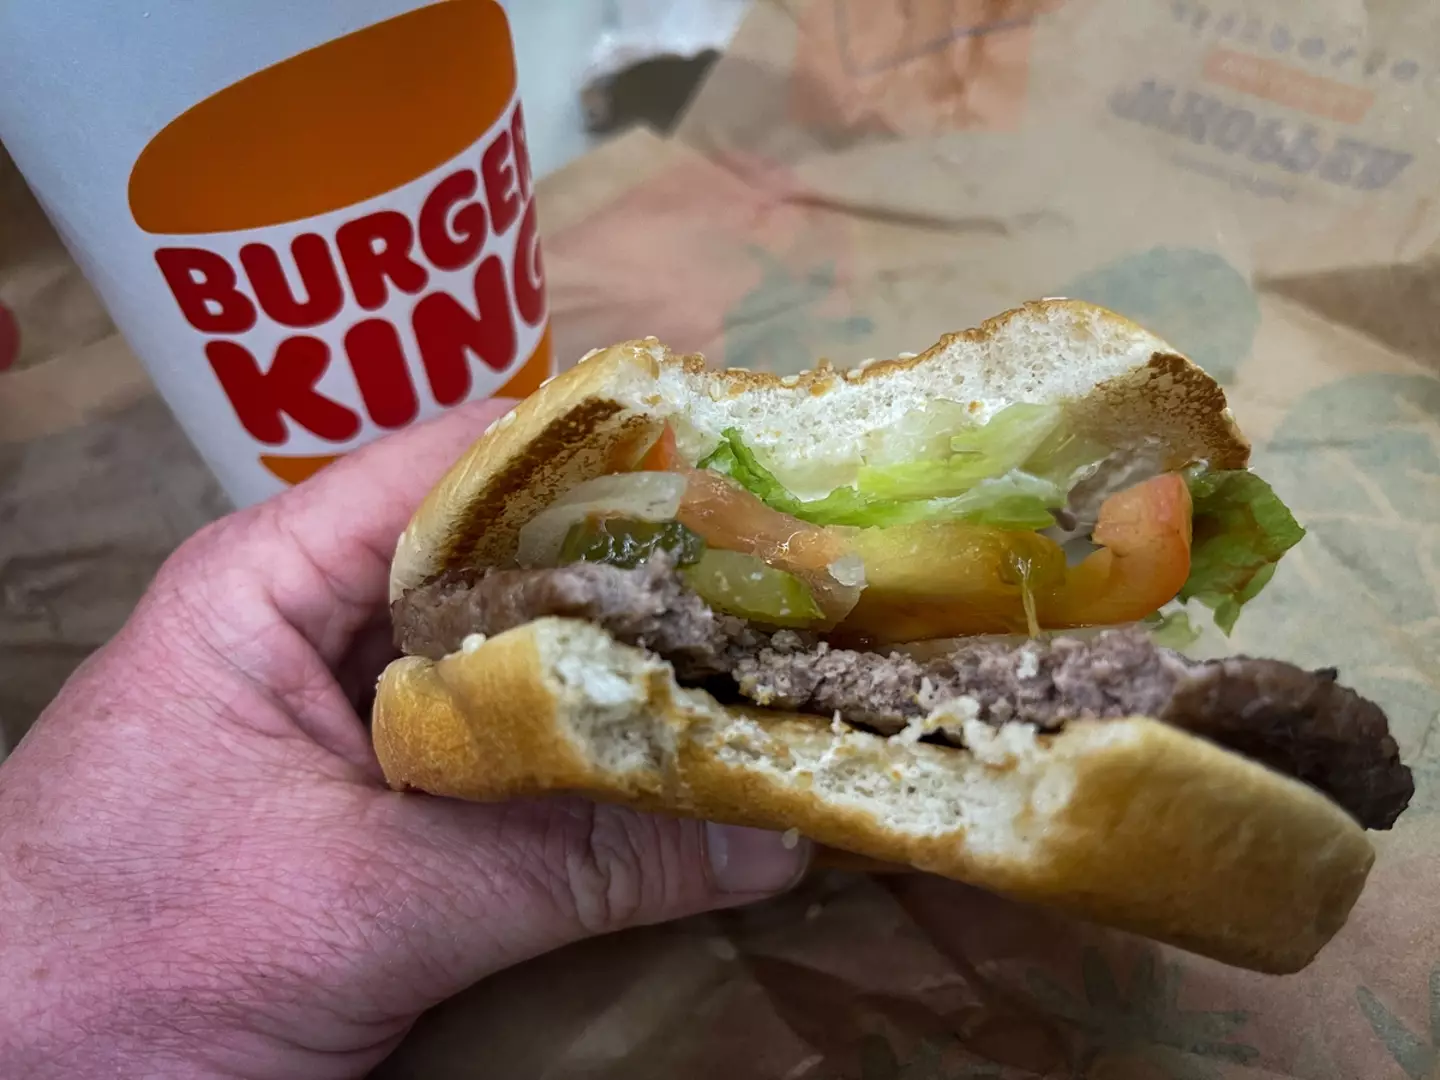 Burger King is being sued over the size of its Whoppers.